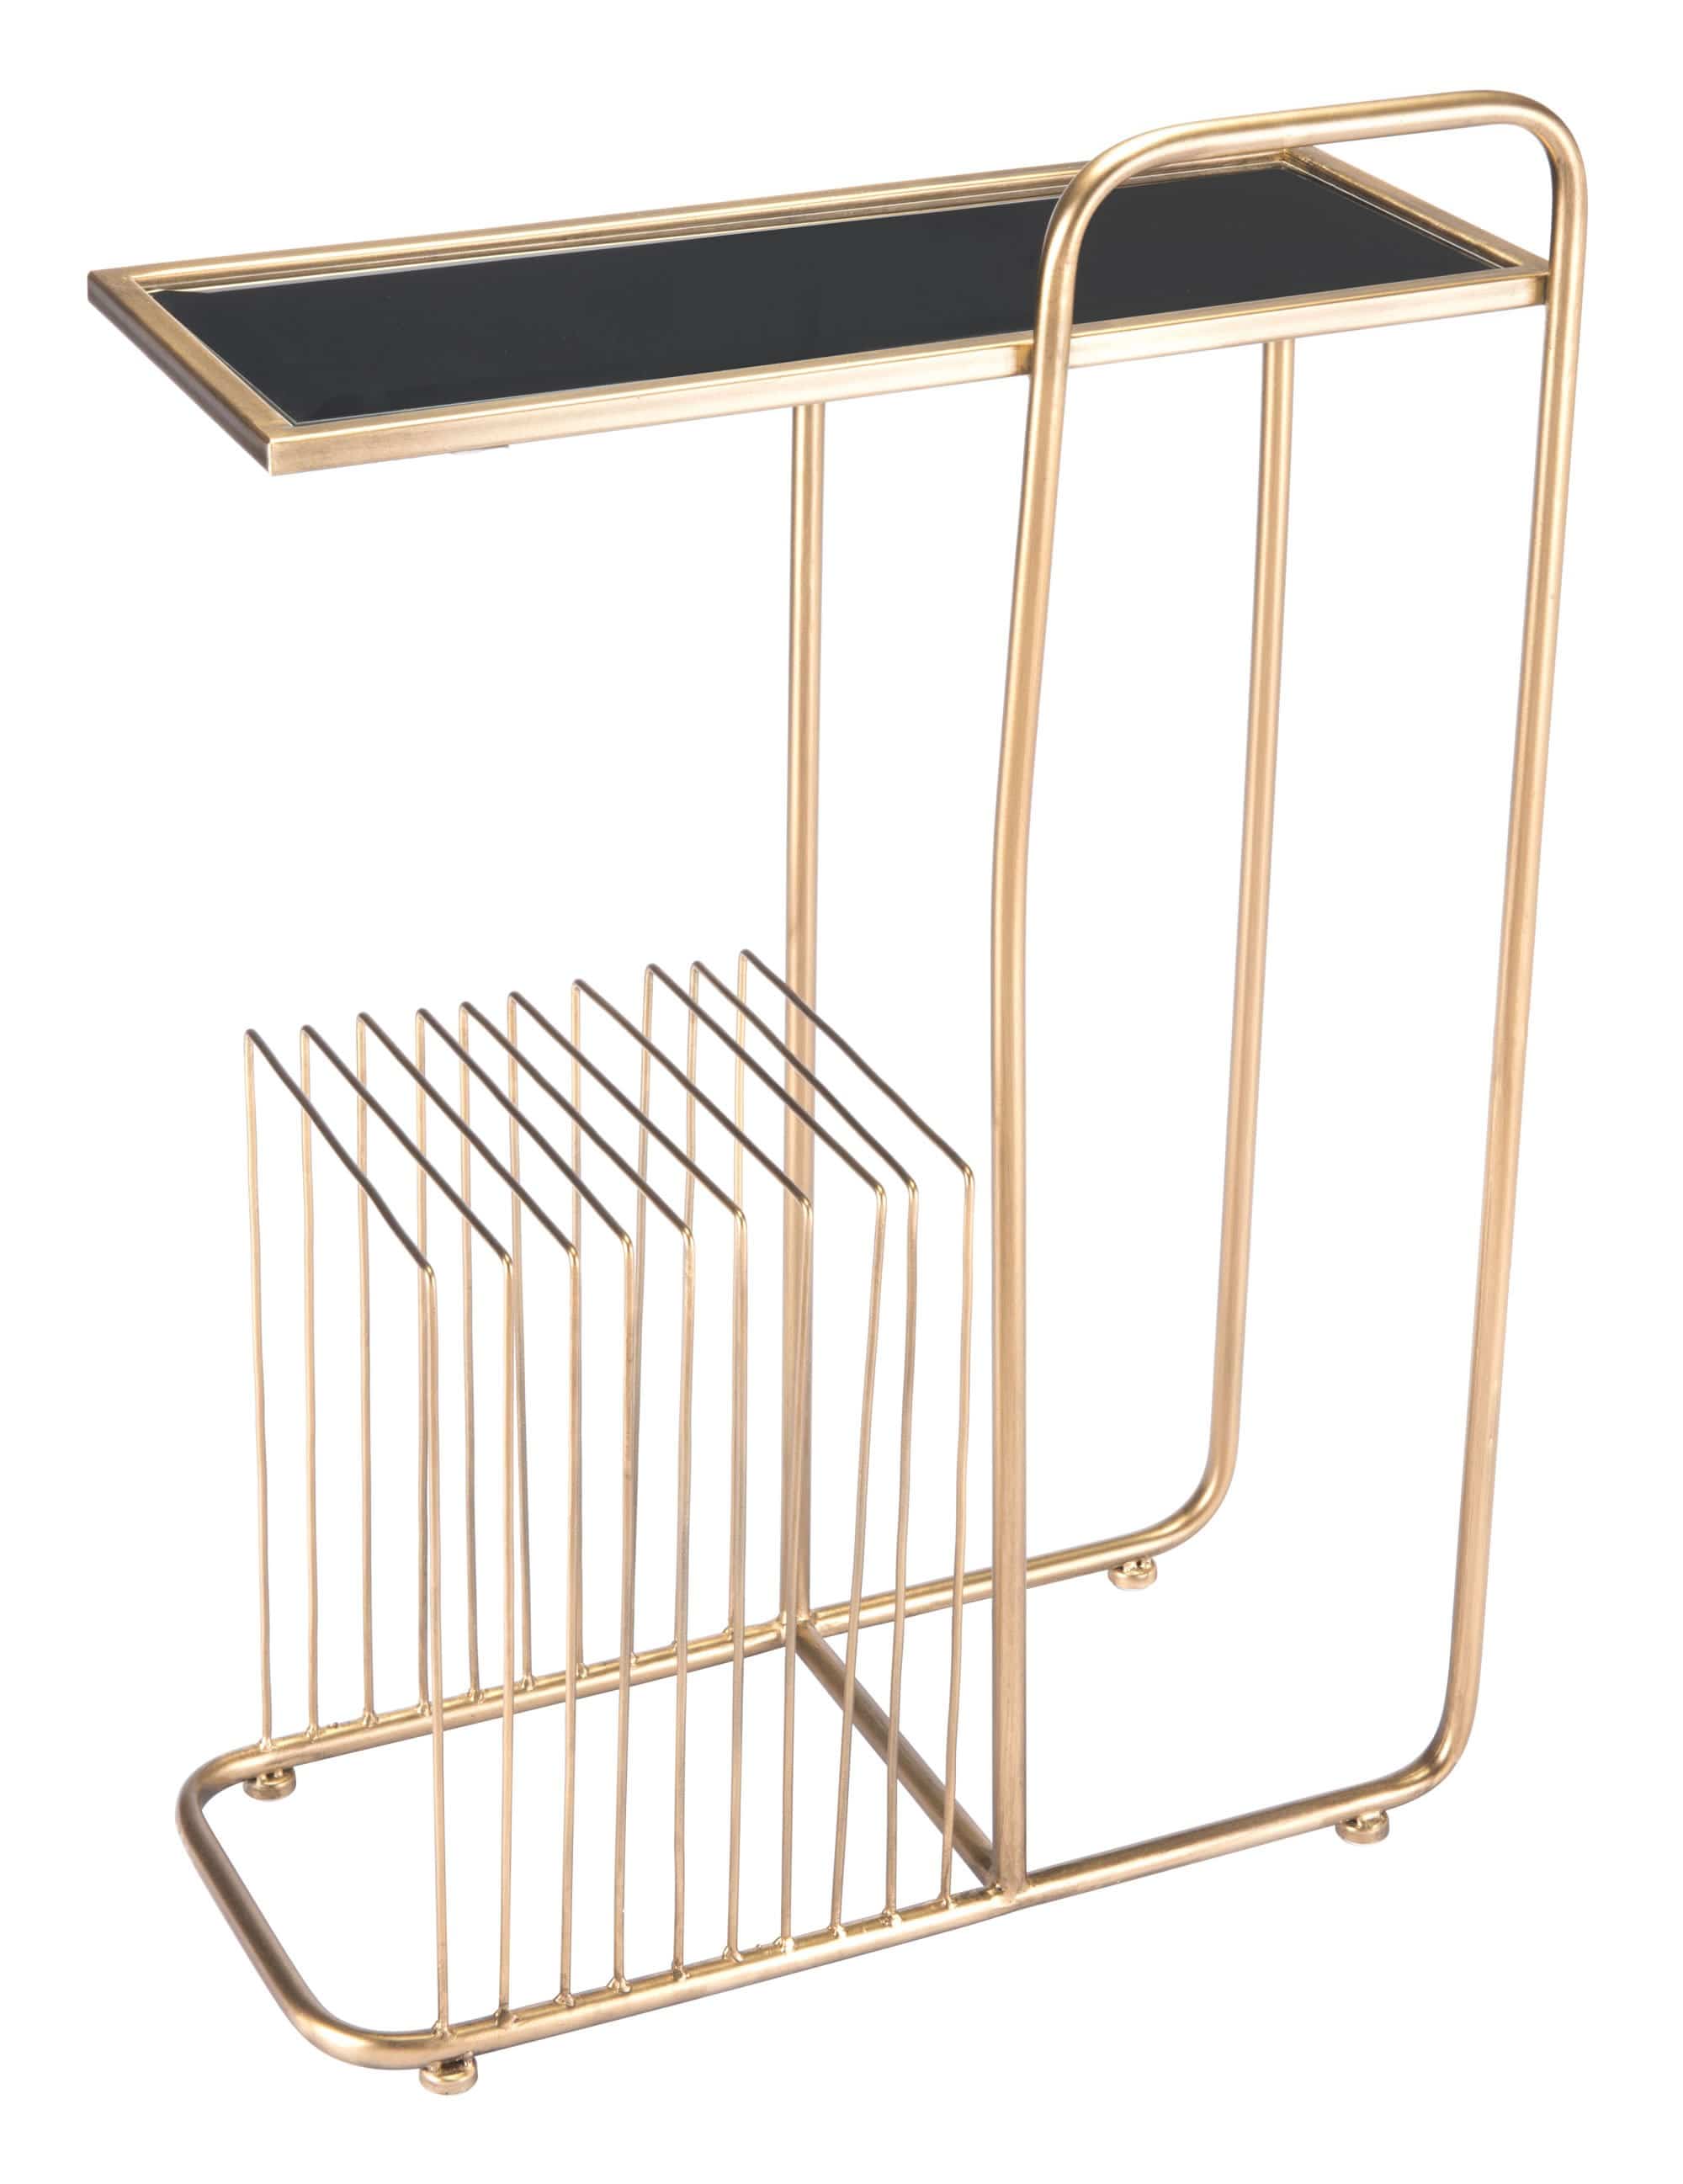 HomeRoots Outdoors Outdoor Furniture > Outdoor Tables Gold / Steel, Mirror 19.7" x 8.5" x 28.3" Gold, Steel, Mirror, Side Table